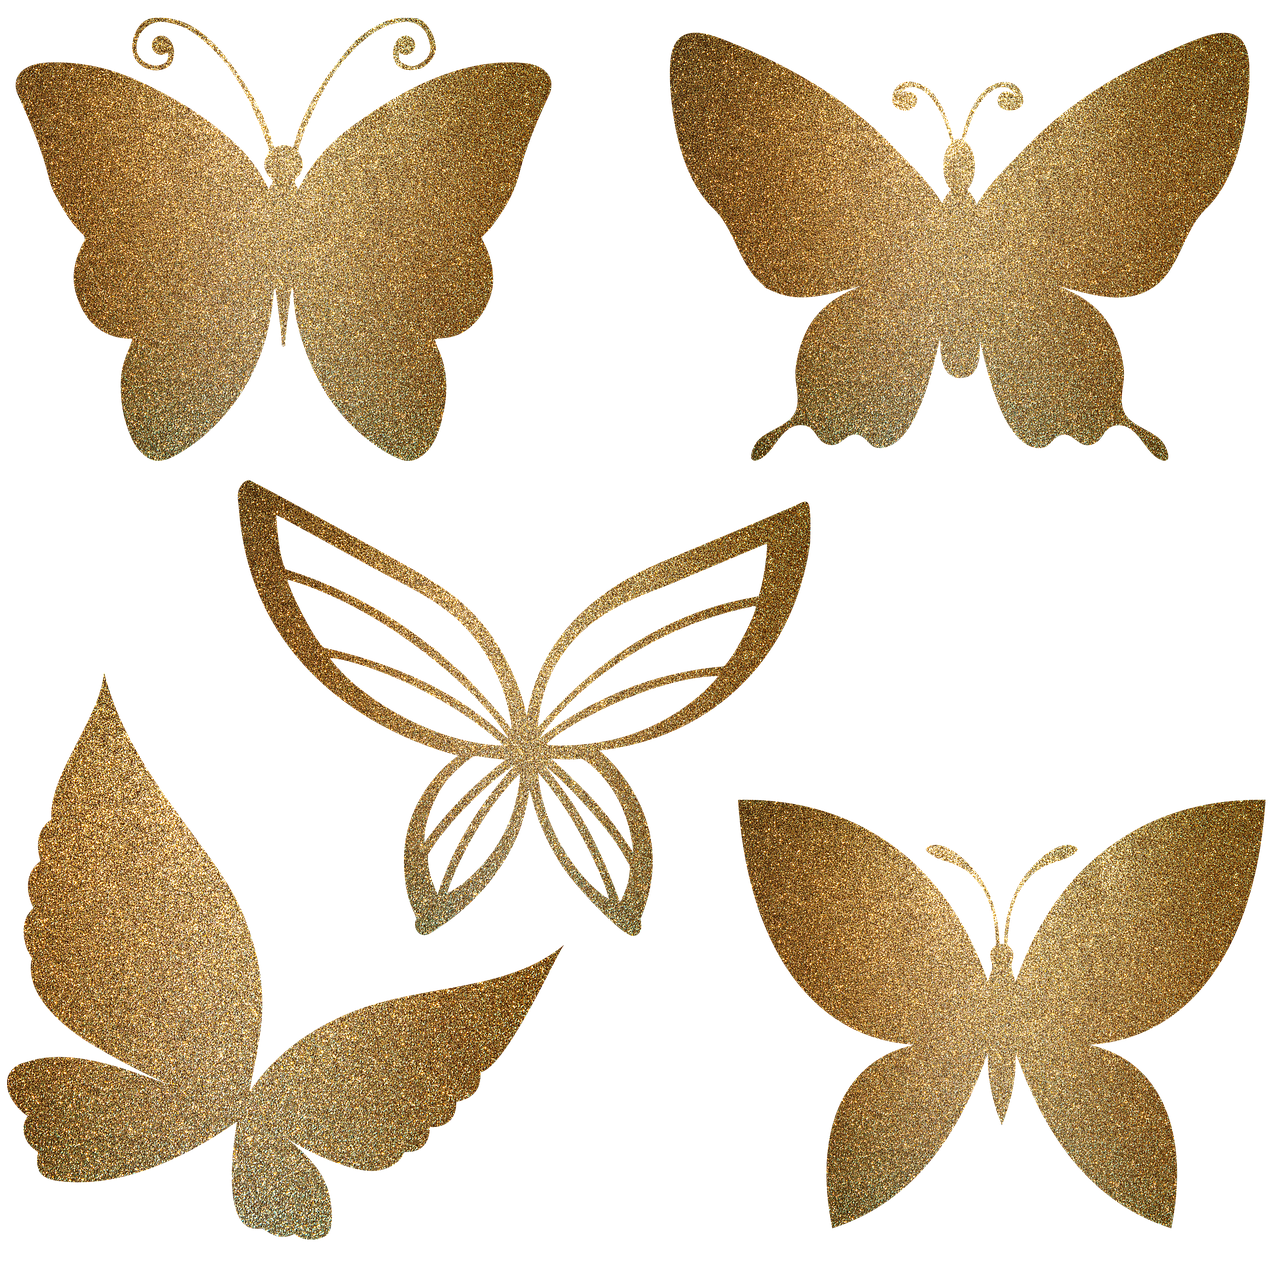 Gold Butterfly PNG Picture